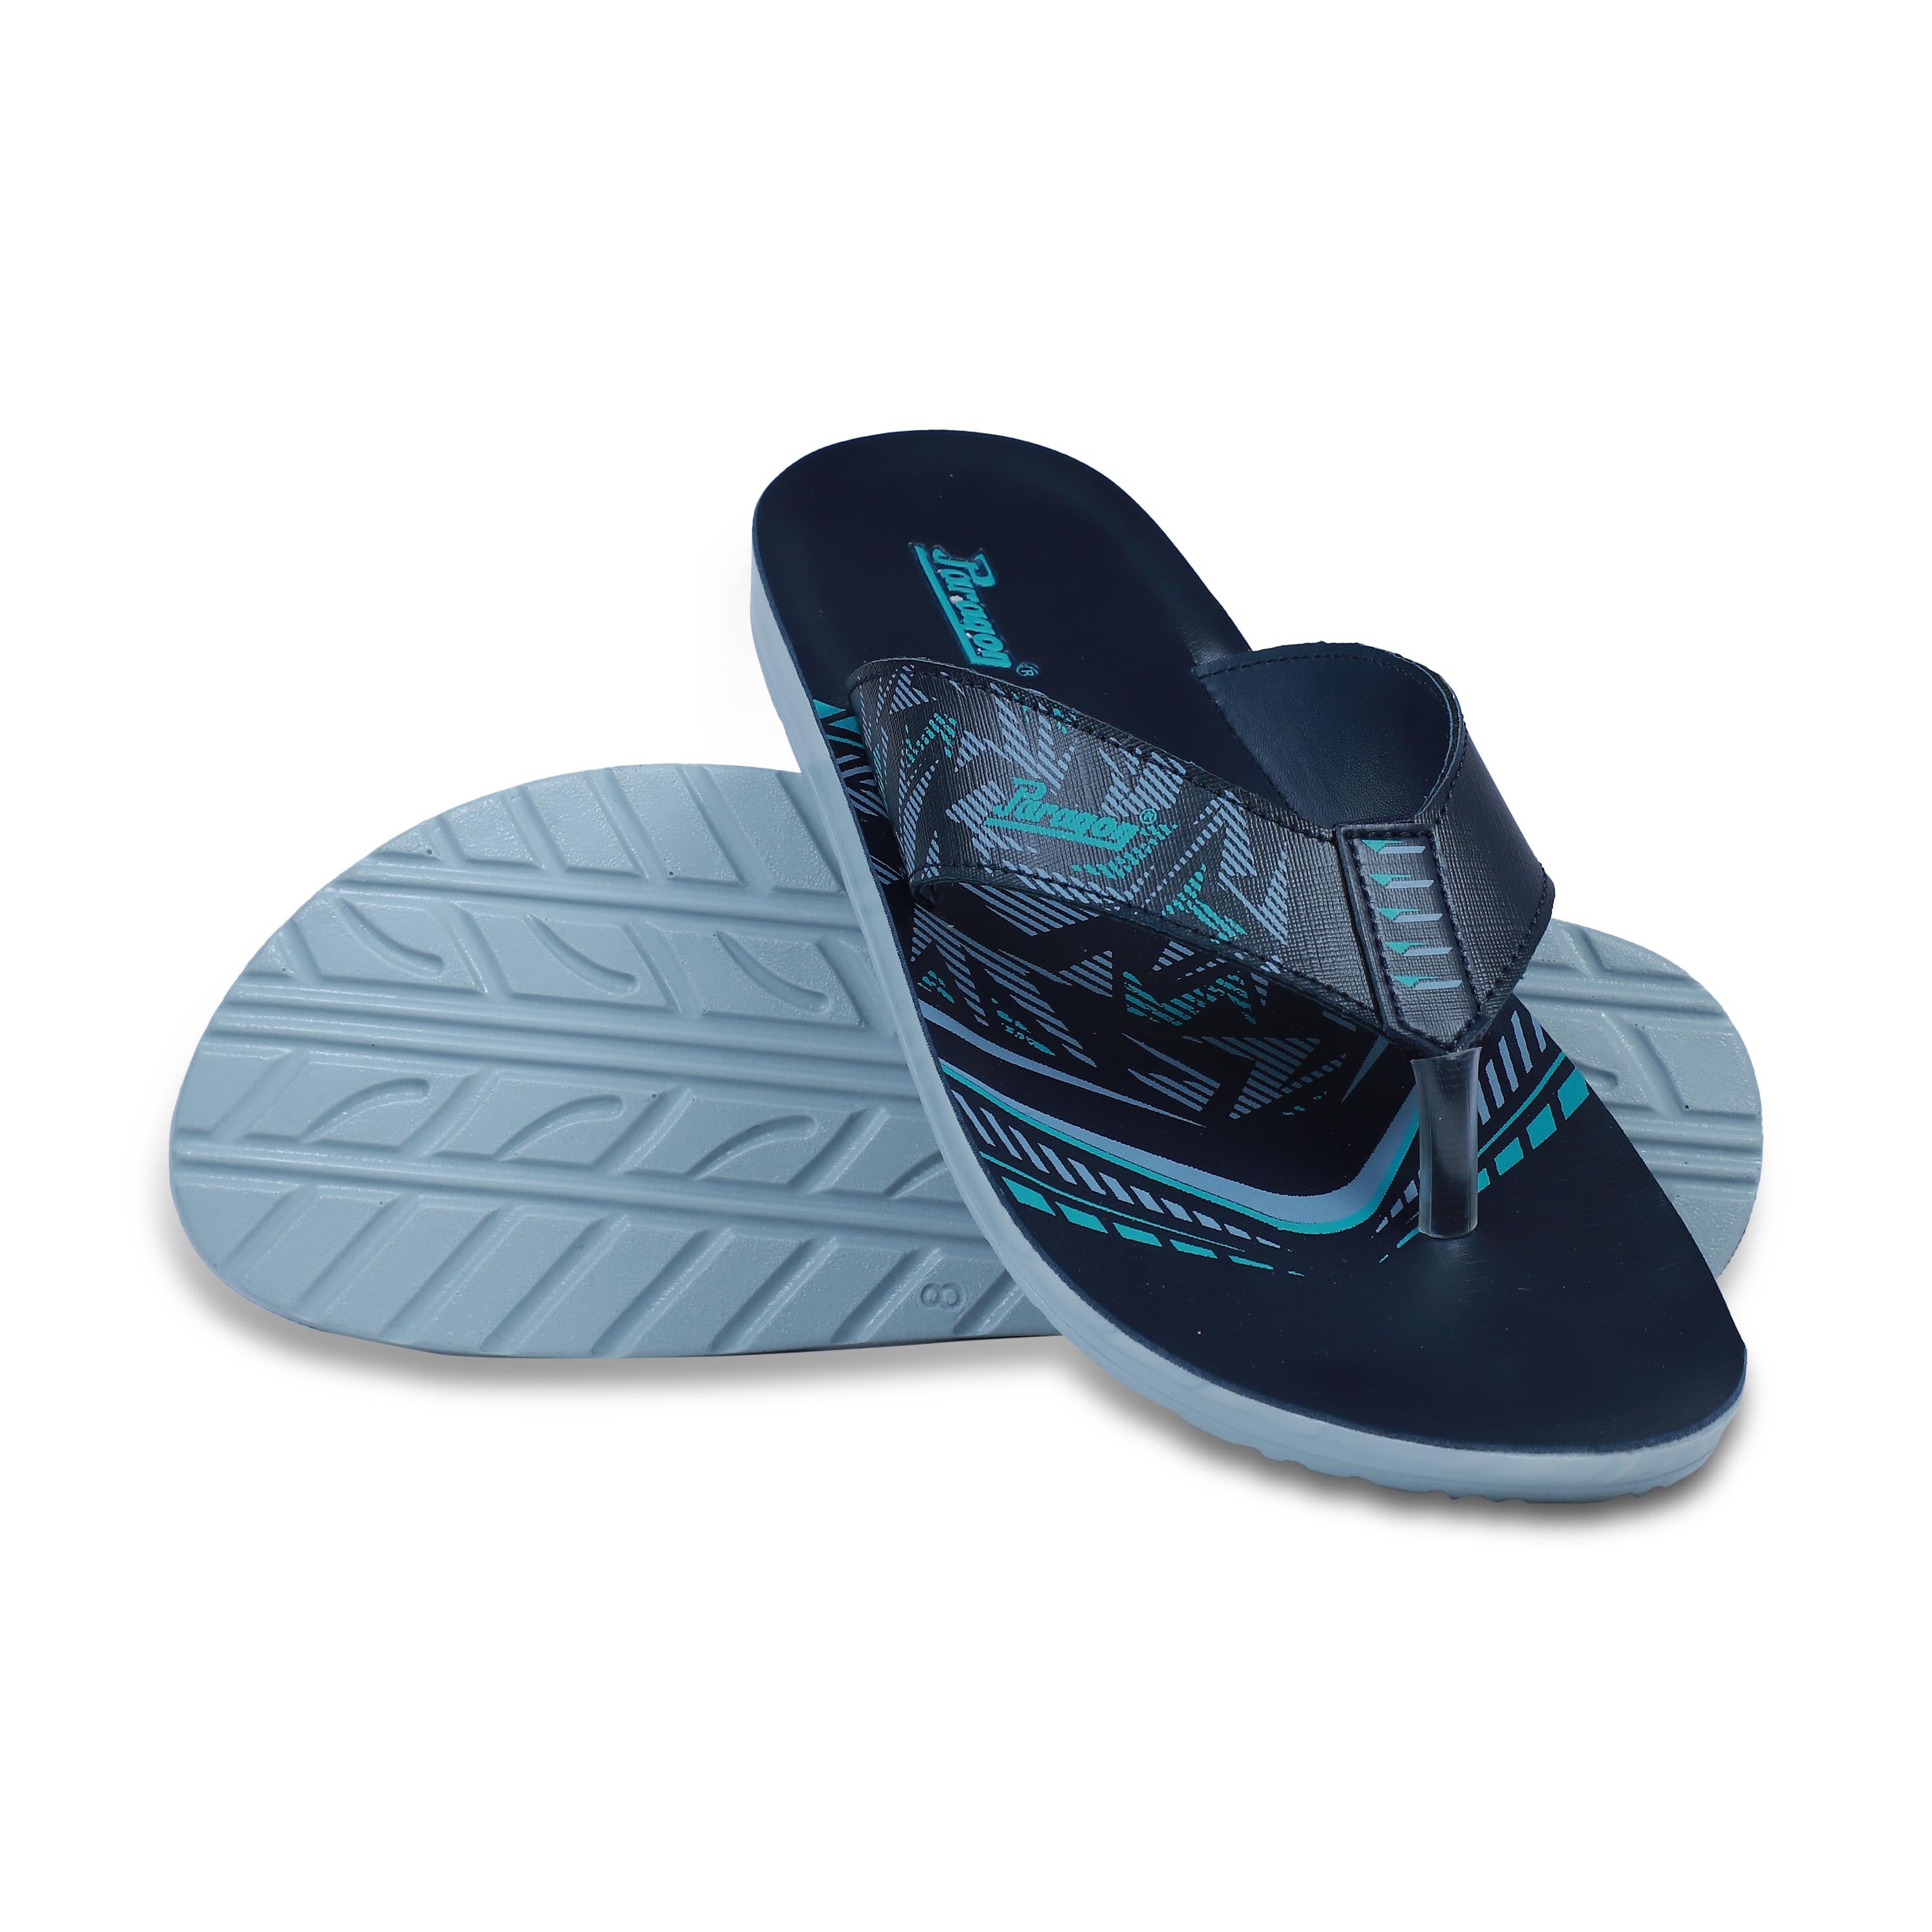 Paragon PUK2216G Men Everyday Lightweight Waterproof Flip Flops Printed Patterns and Extra Sole Support | Casual Flip Flops